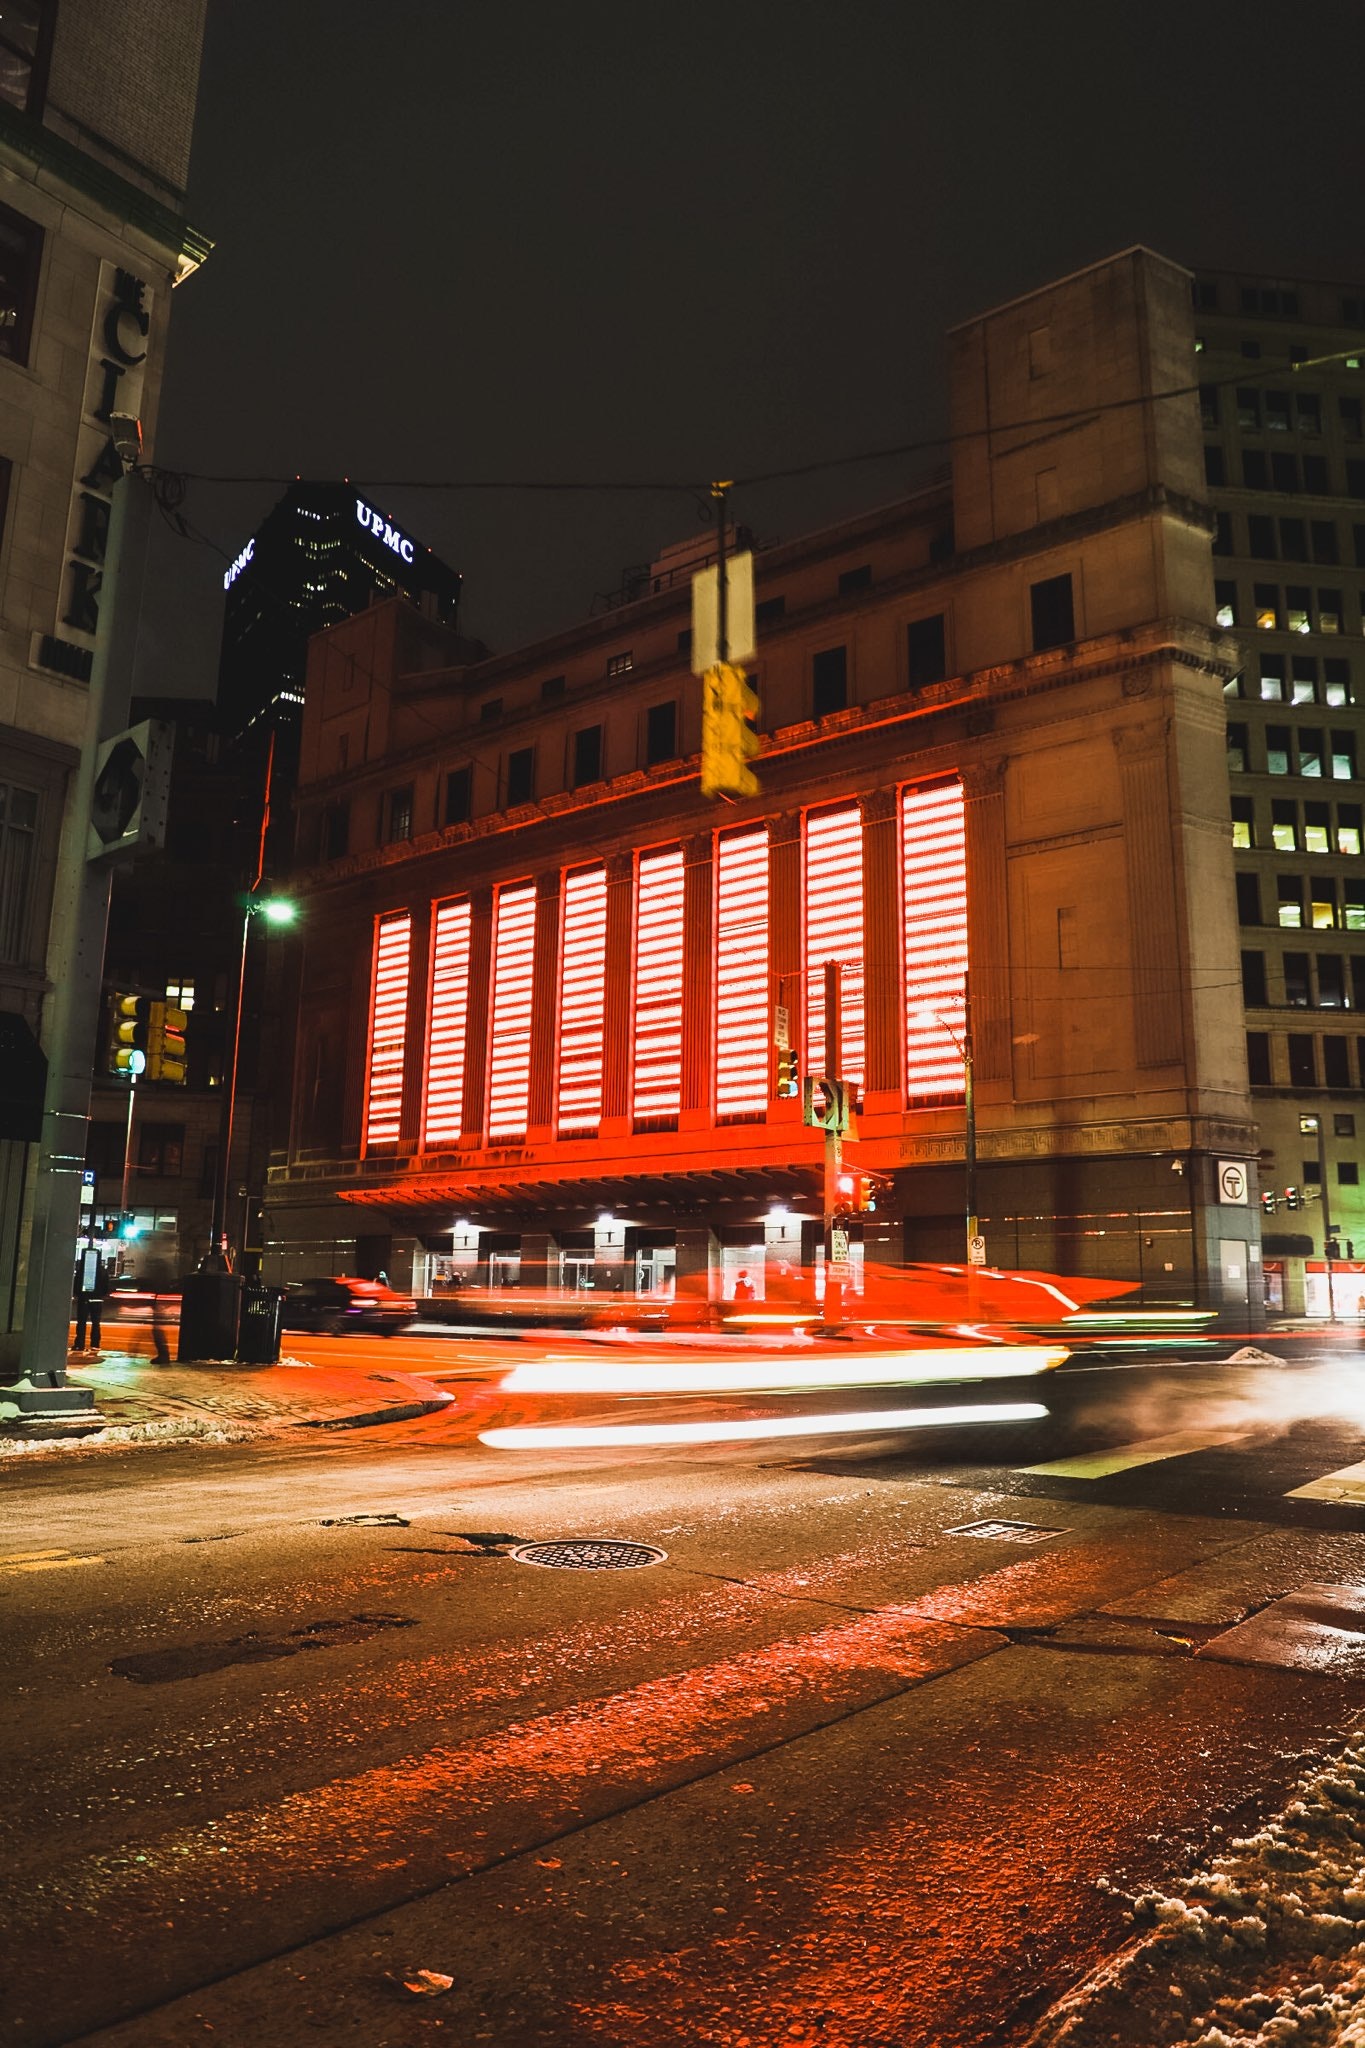 A red light installation is affixed onto the side of a building